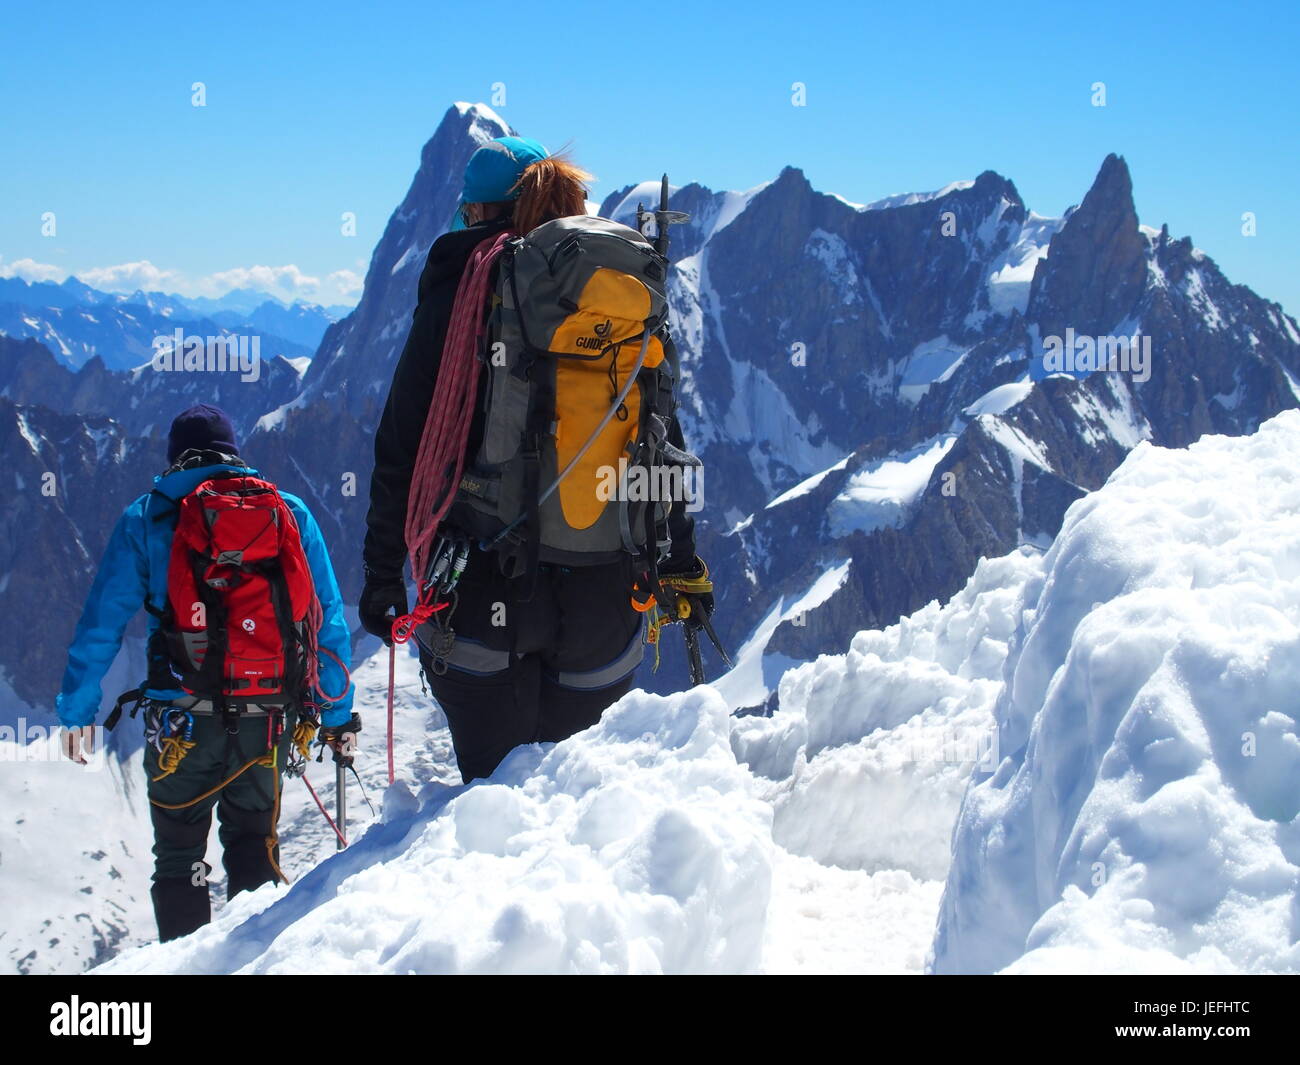 Two alpinists and mountaineer climber on AIGUILLE DU MIDI, CHAMONIX MONT BLANC french ALPS, top alpine mountains range landscape, FRANCE on July. Stock Photo